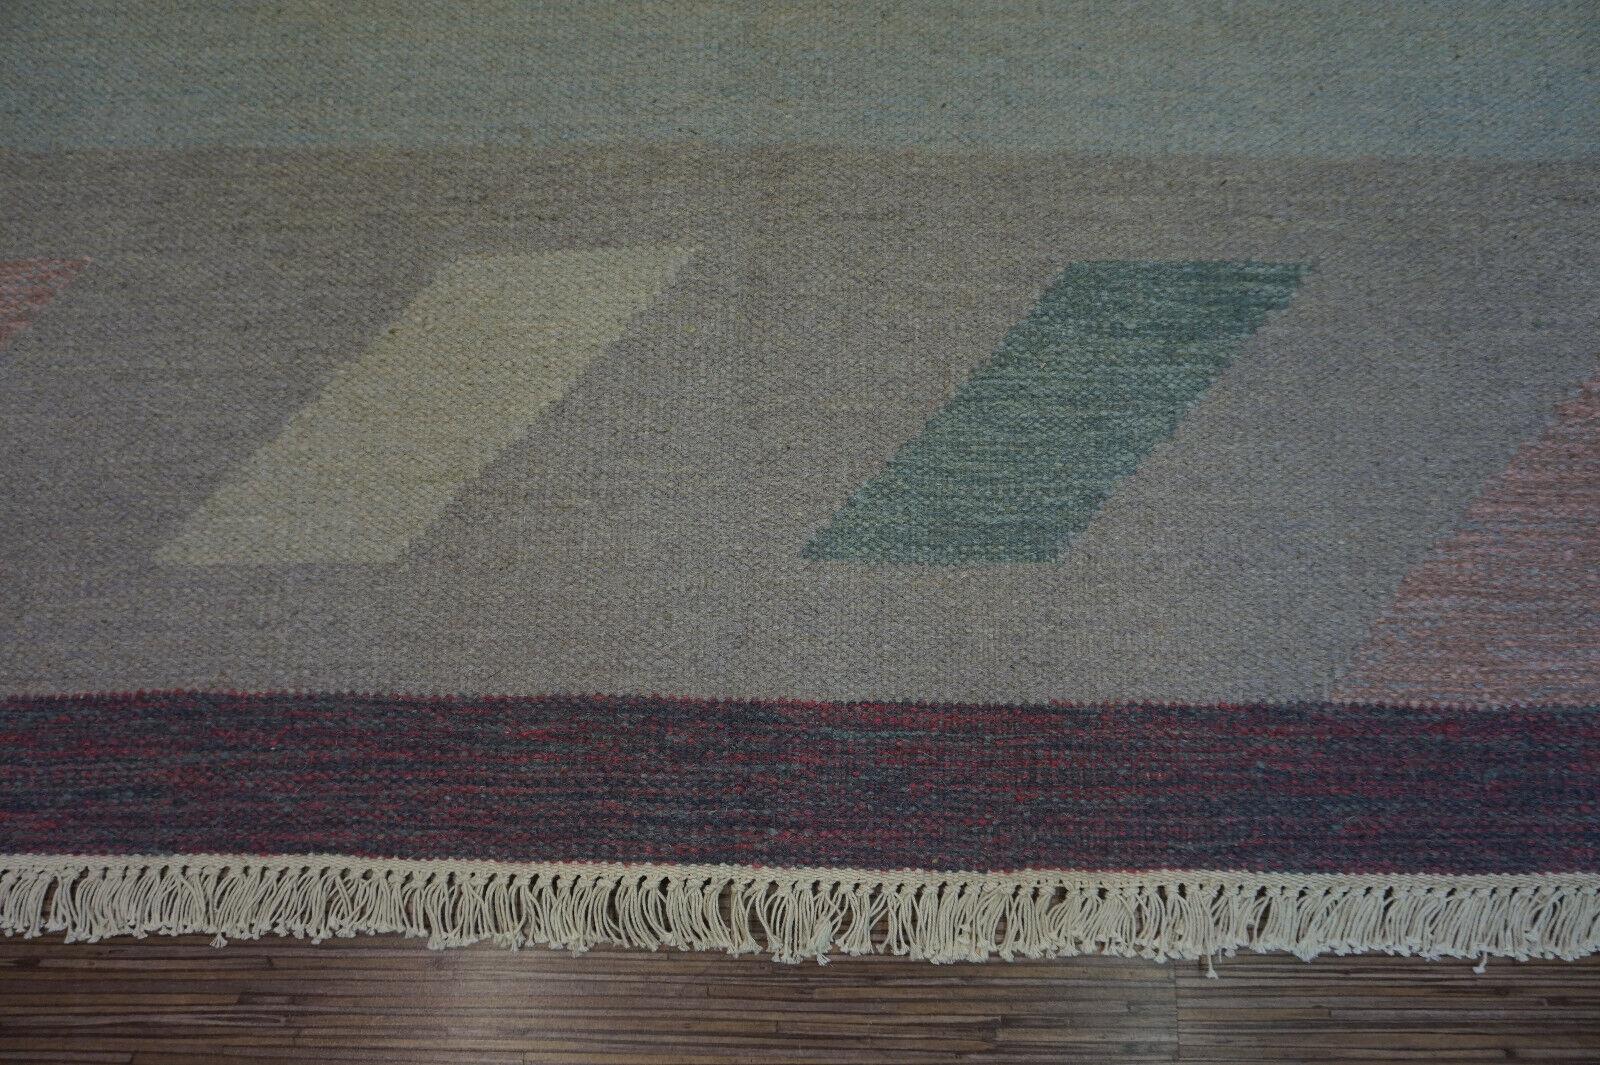 Handmade Vintage Indian Dhurrie Kilim Rug 8.4' x 9.6', 1970s - 1D44 In Good Condition For Sale In Bordeaux, FR